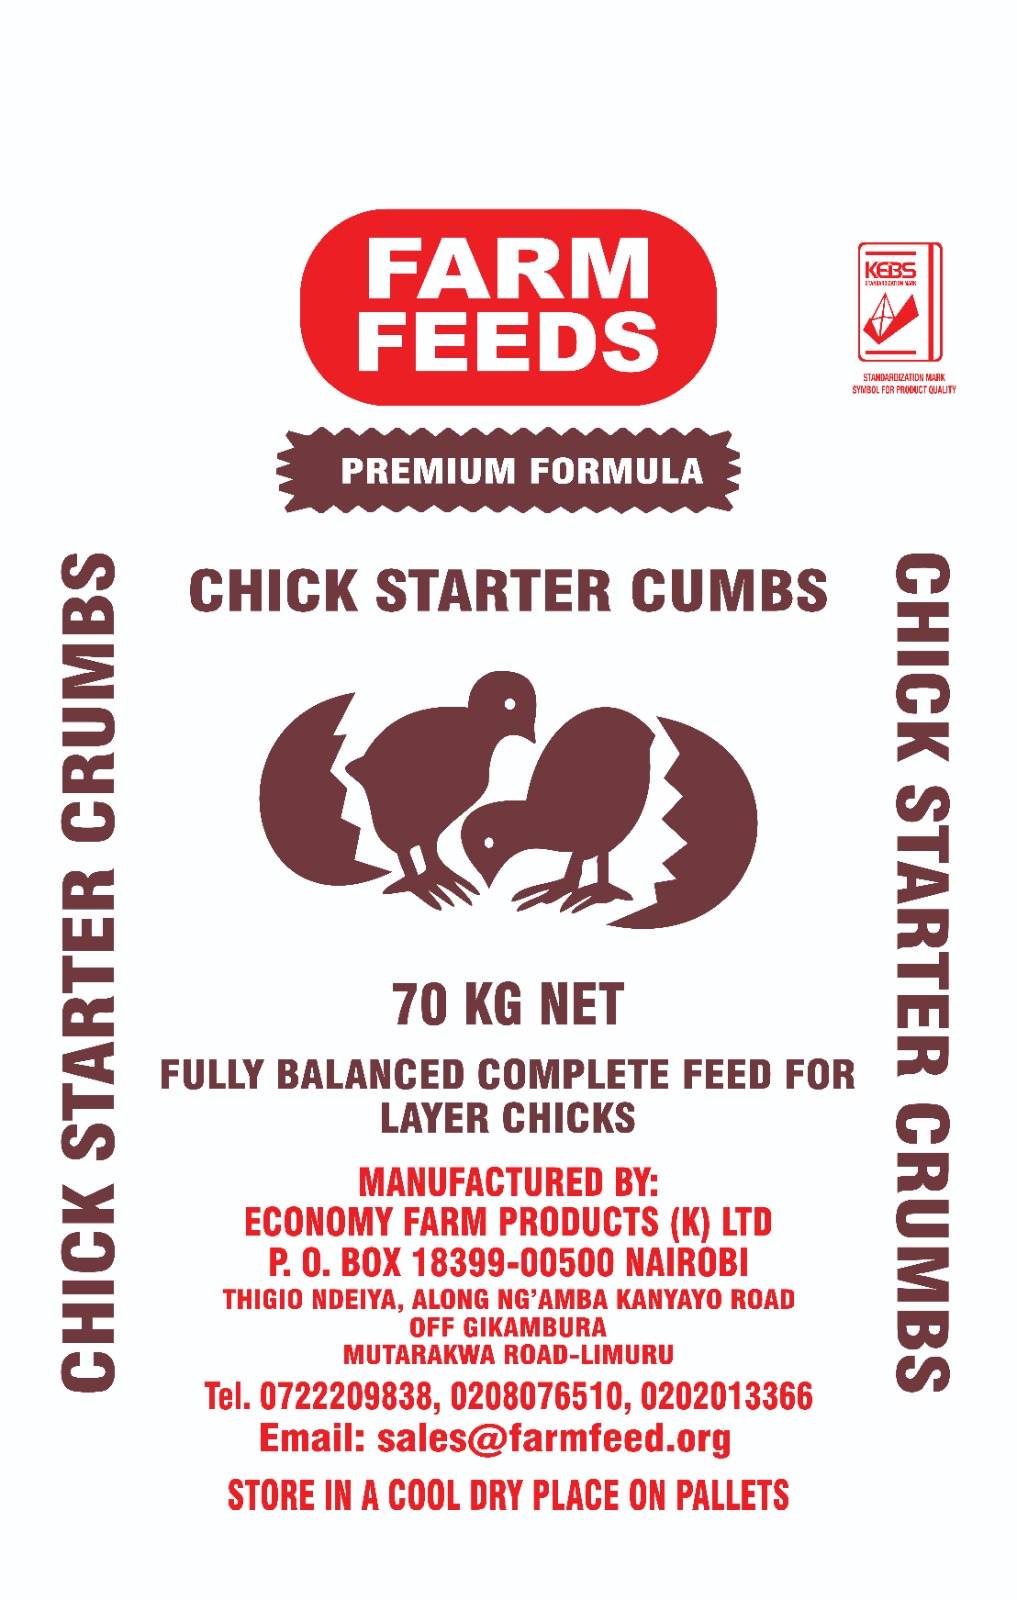 This is a standard meat chicken feed for young broiler chickks from day old up to 3 weeks of age.